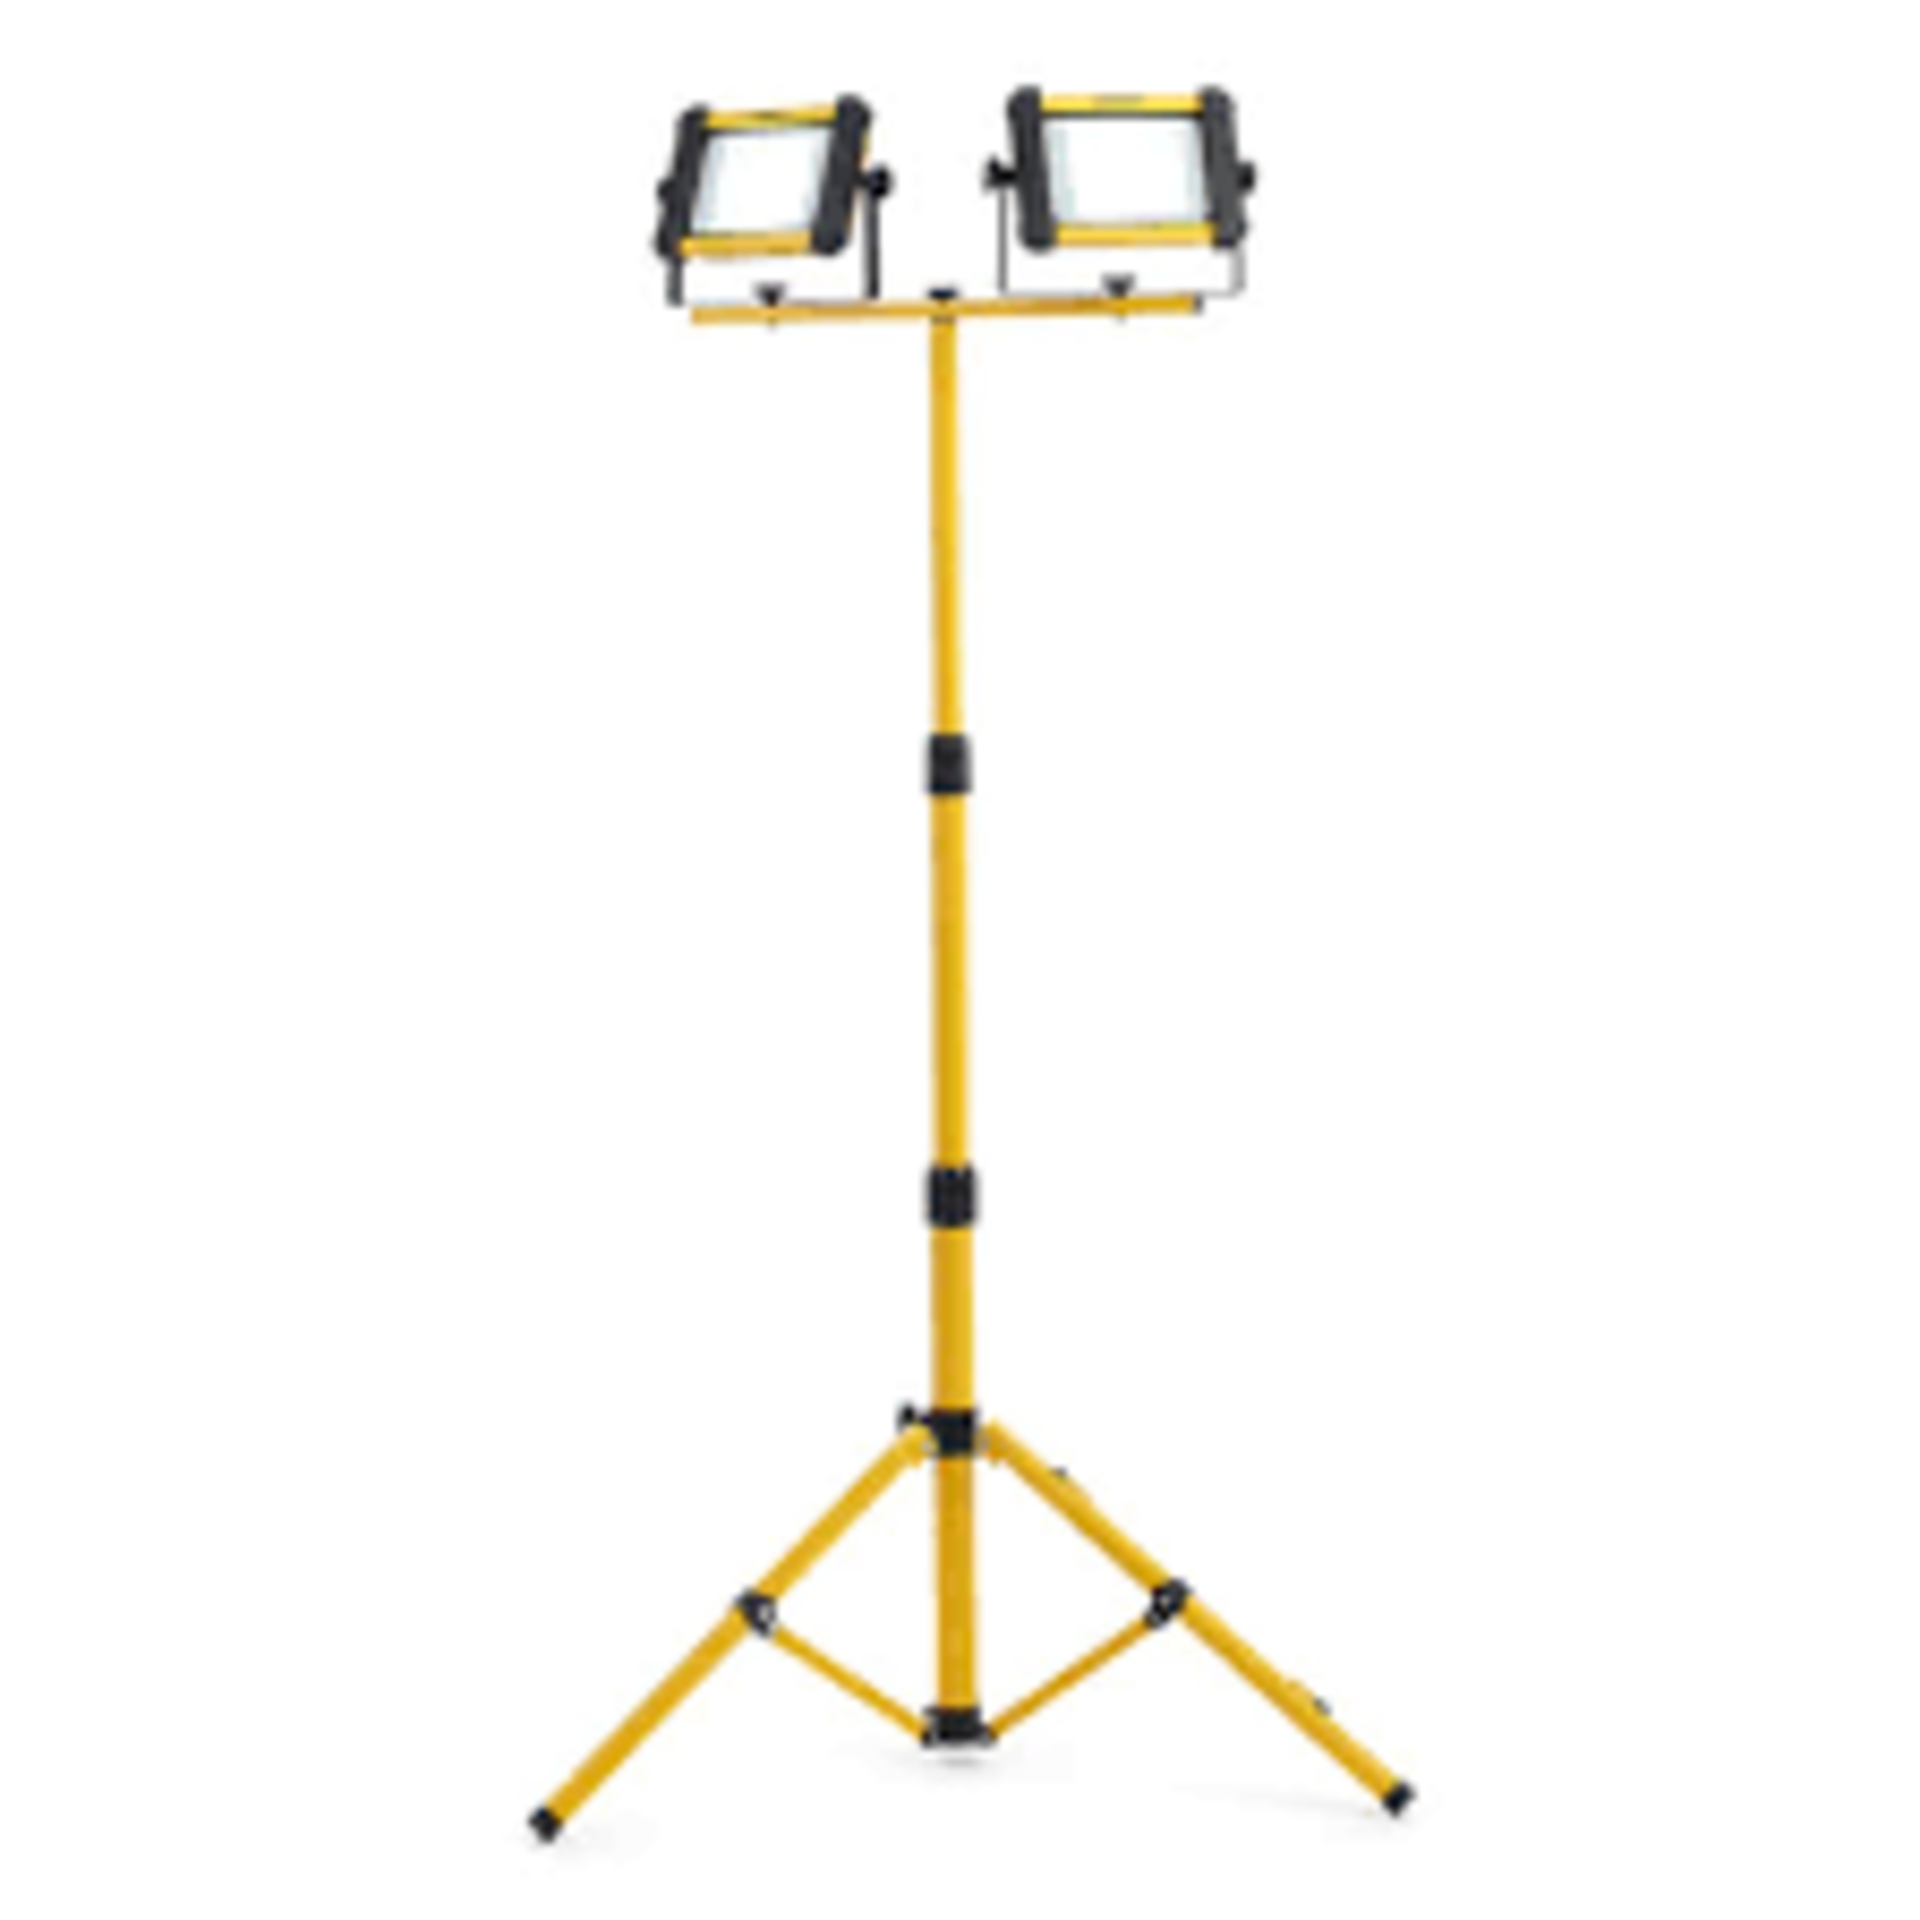 Stanley 240V Twin LED Work Light With Tripod. - P6.